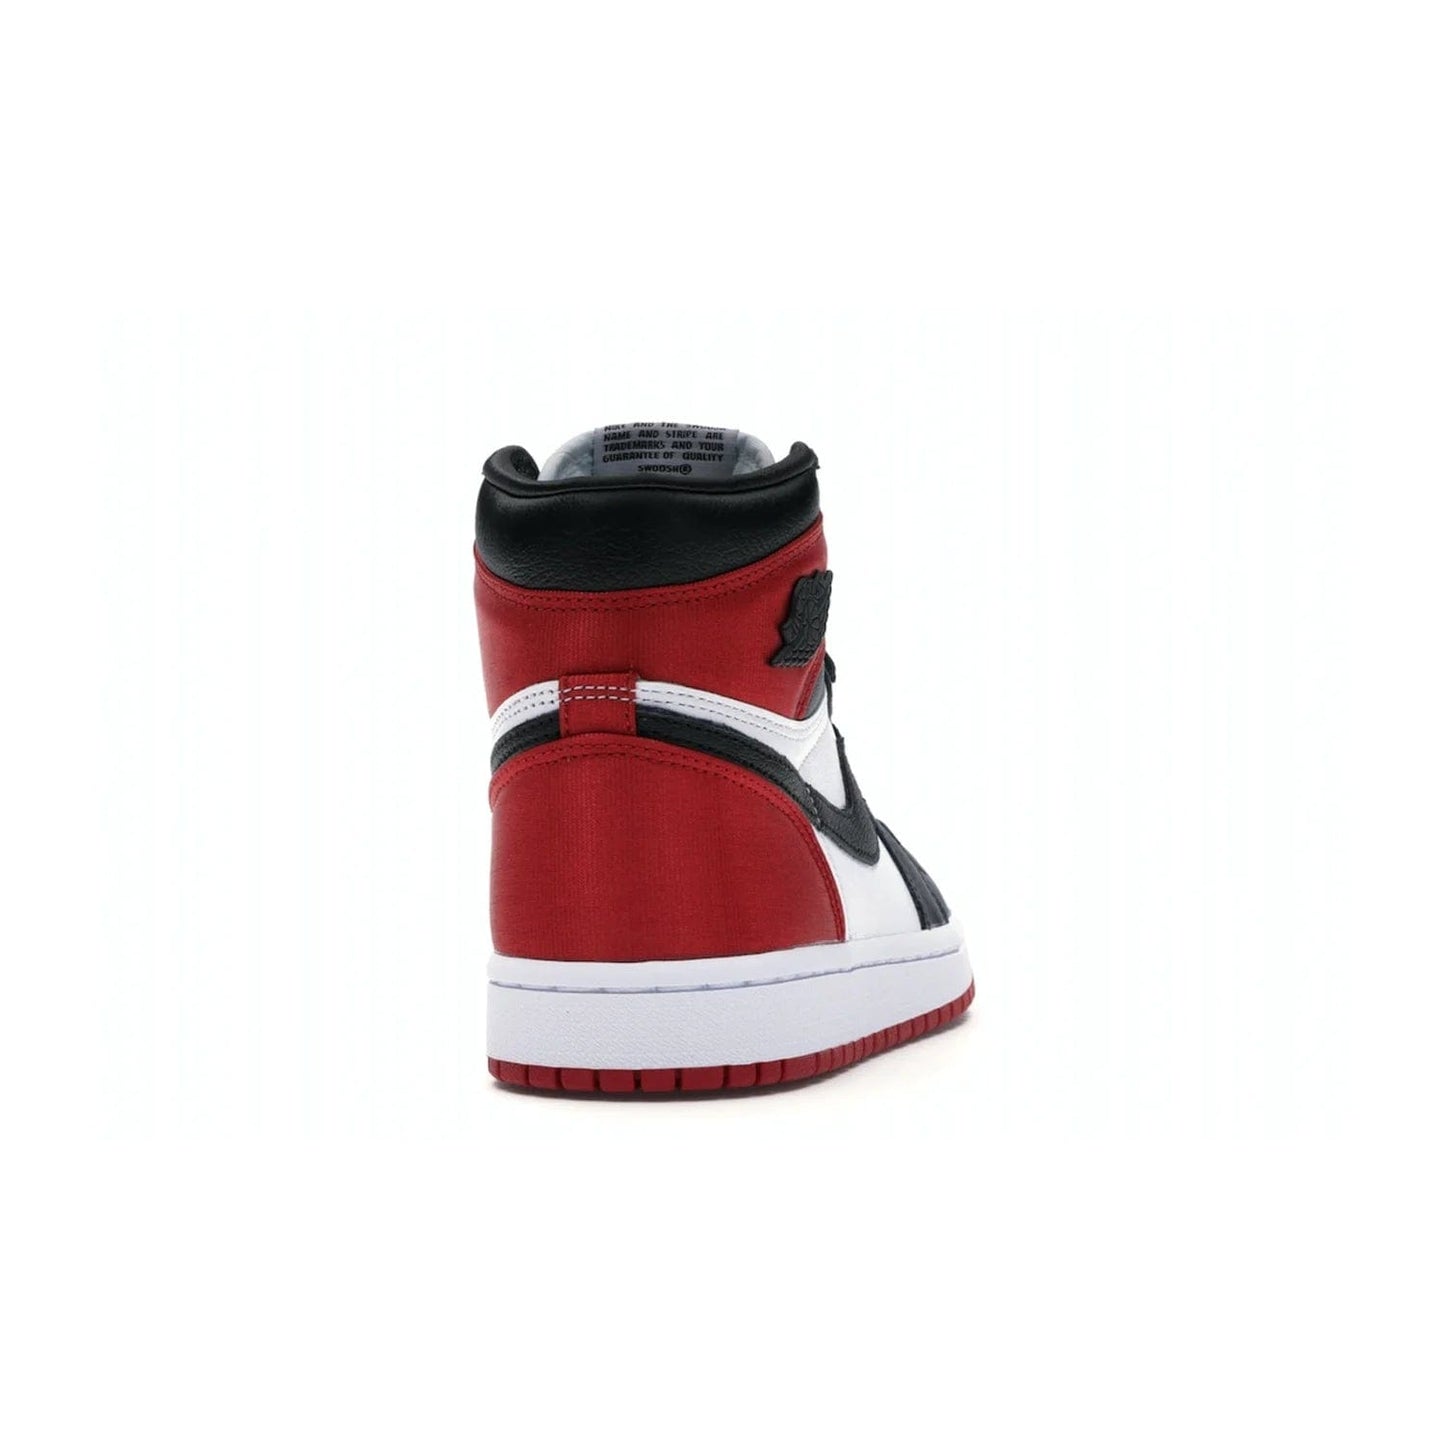 Jordan 1 Retro High Satin Black Toe (Women's) - Image 29 - Only at www.BallersClubKickz.com - Luxurious take on the timeless Air Jordan 1. Features a mix of black leather and satin materials with subtle University Red accents. Elevated look with metal Wings logo on the heel. Released in August 2019.